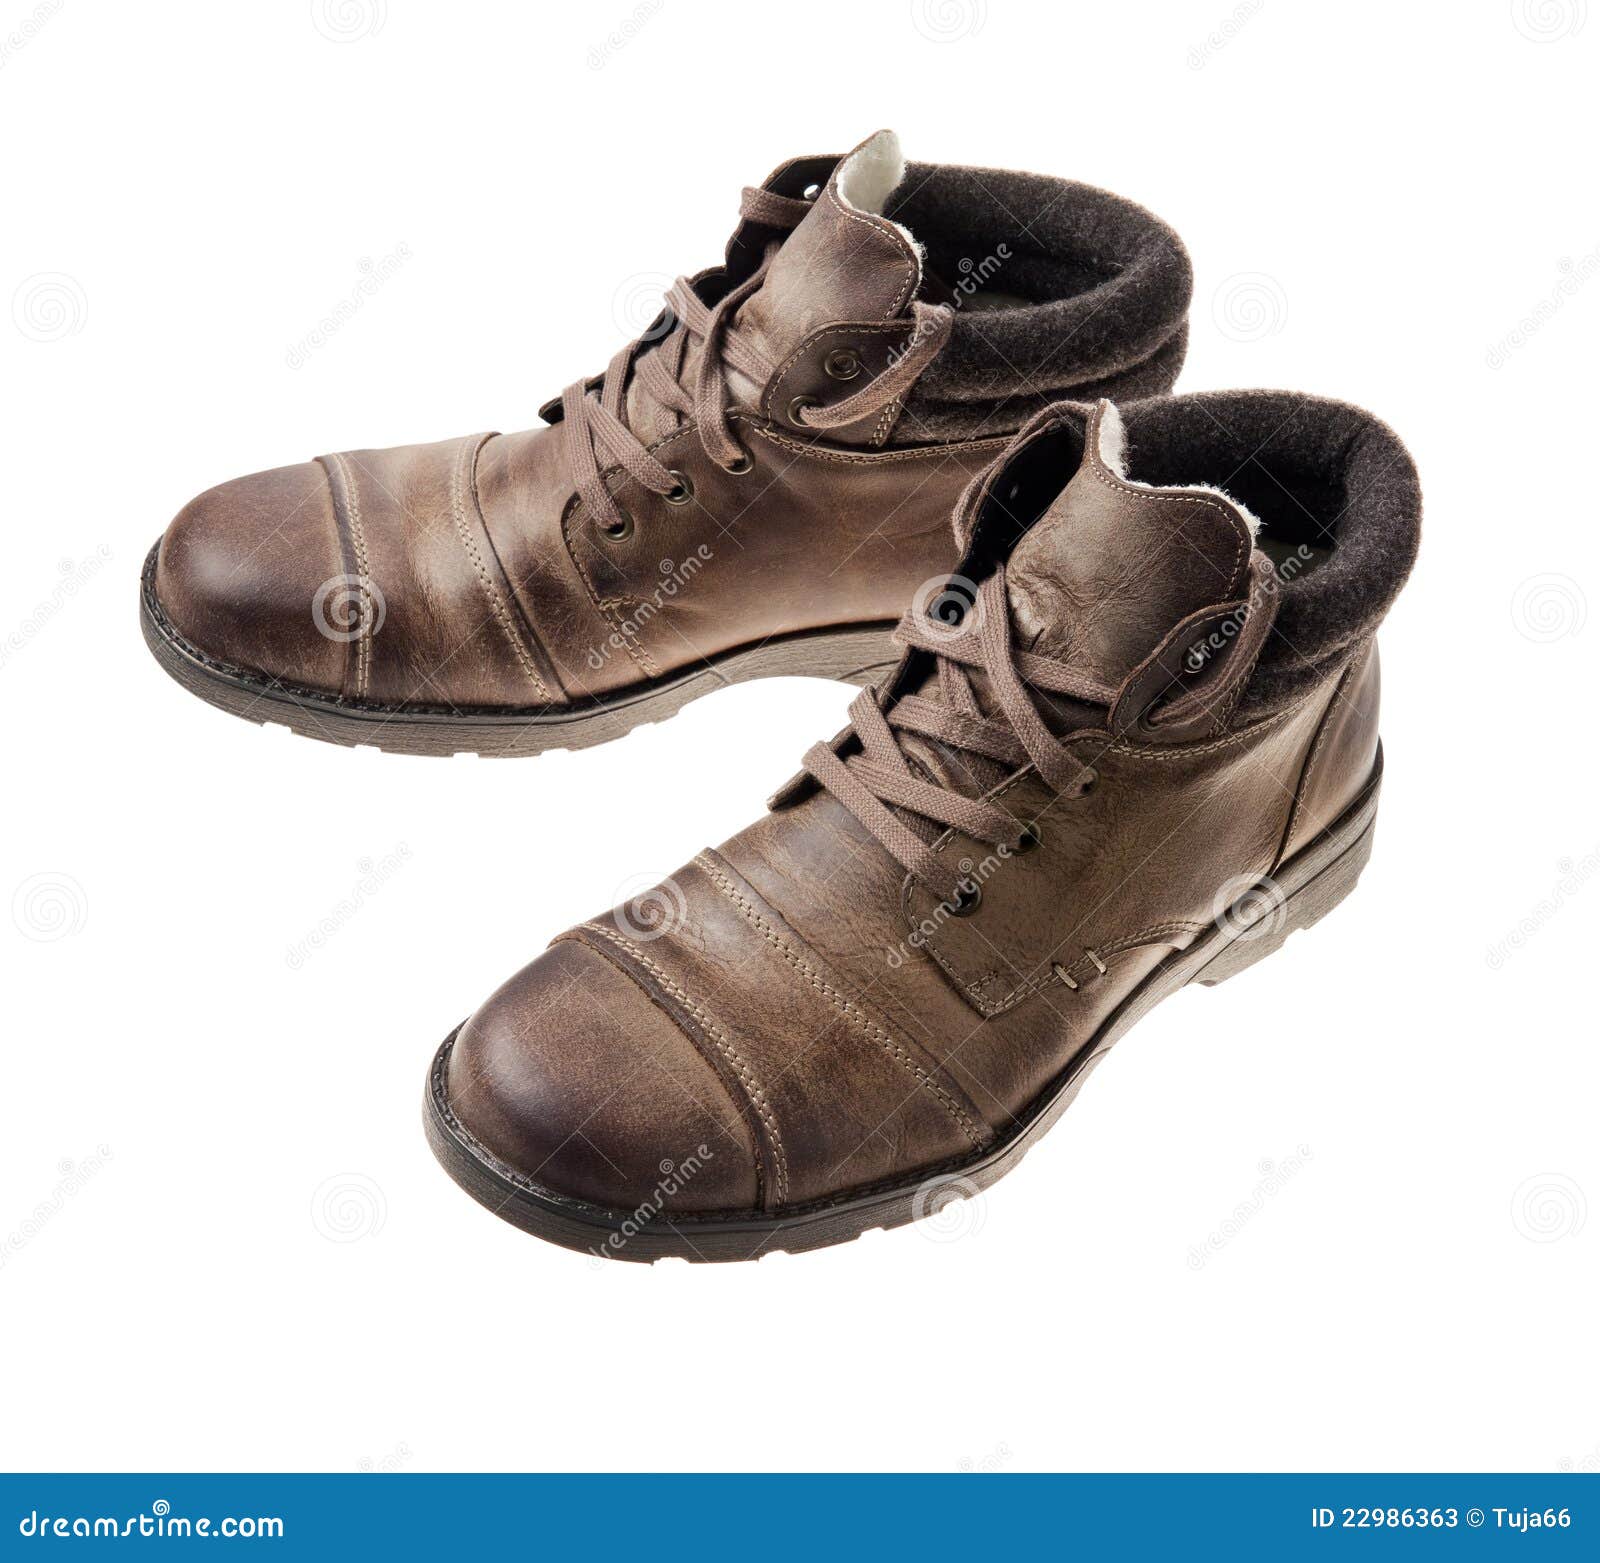 Brown shoes stock image. Image of activity, leather, clothing - 22986363